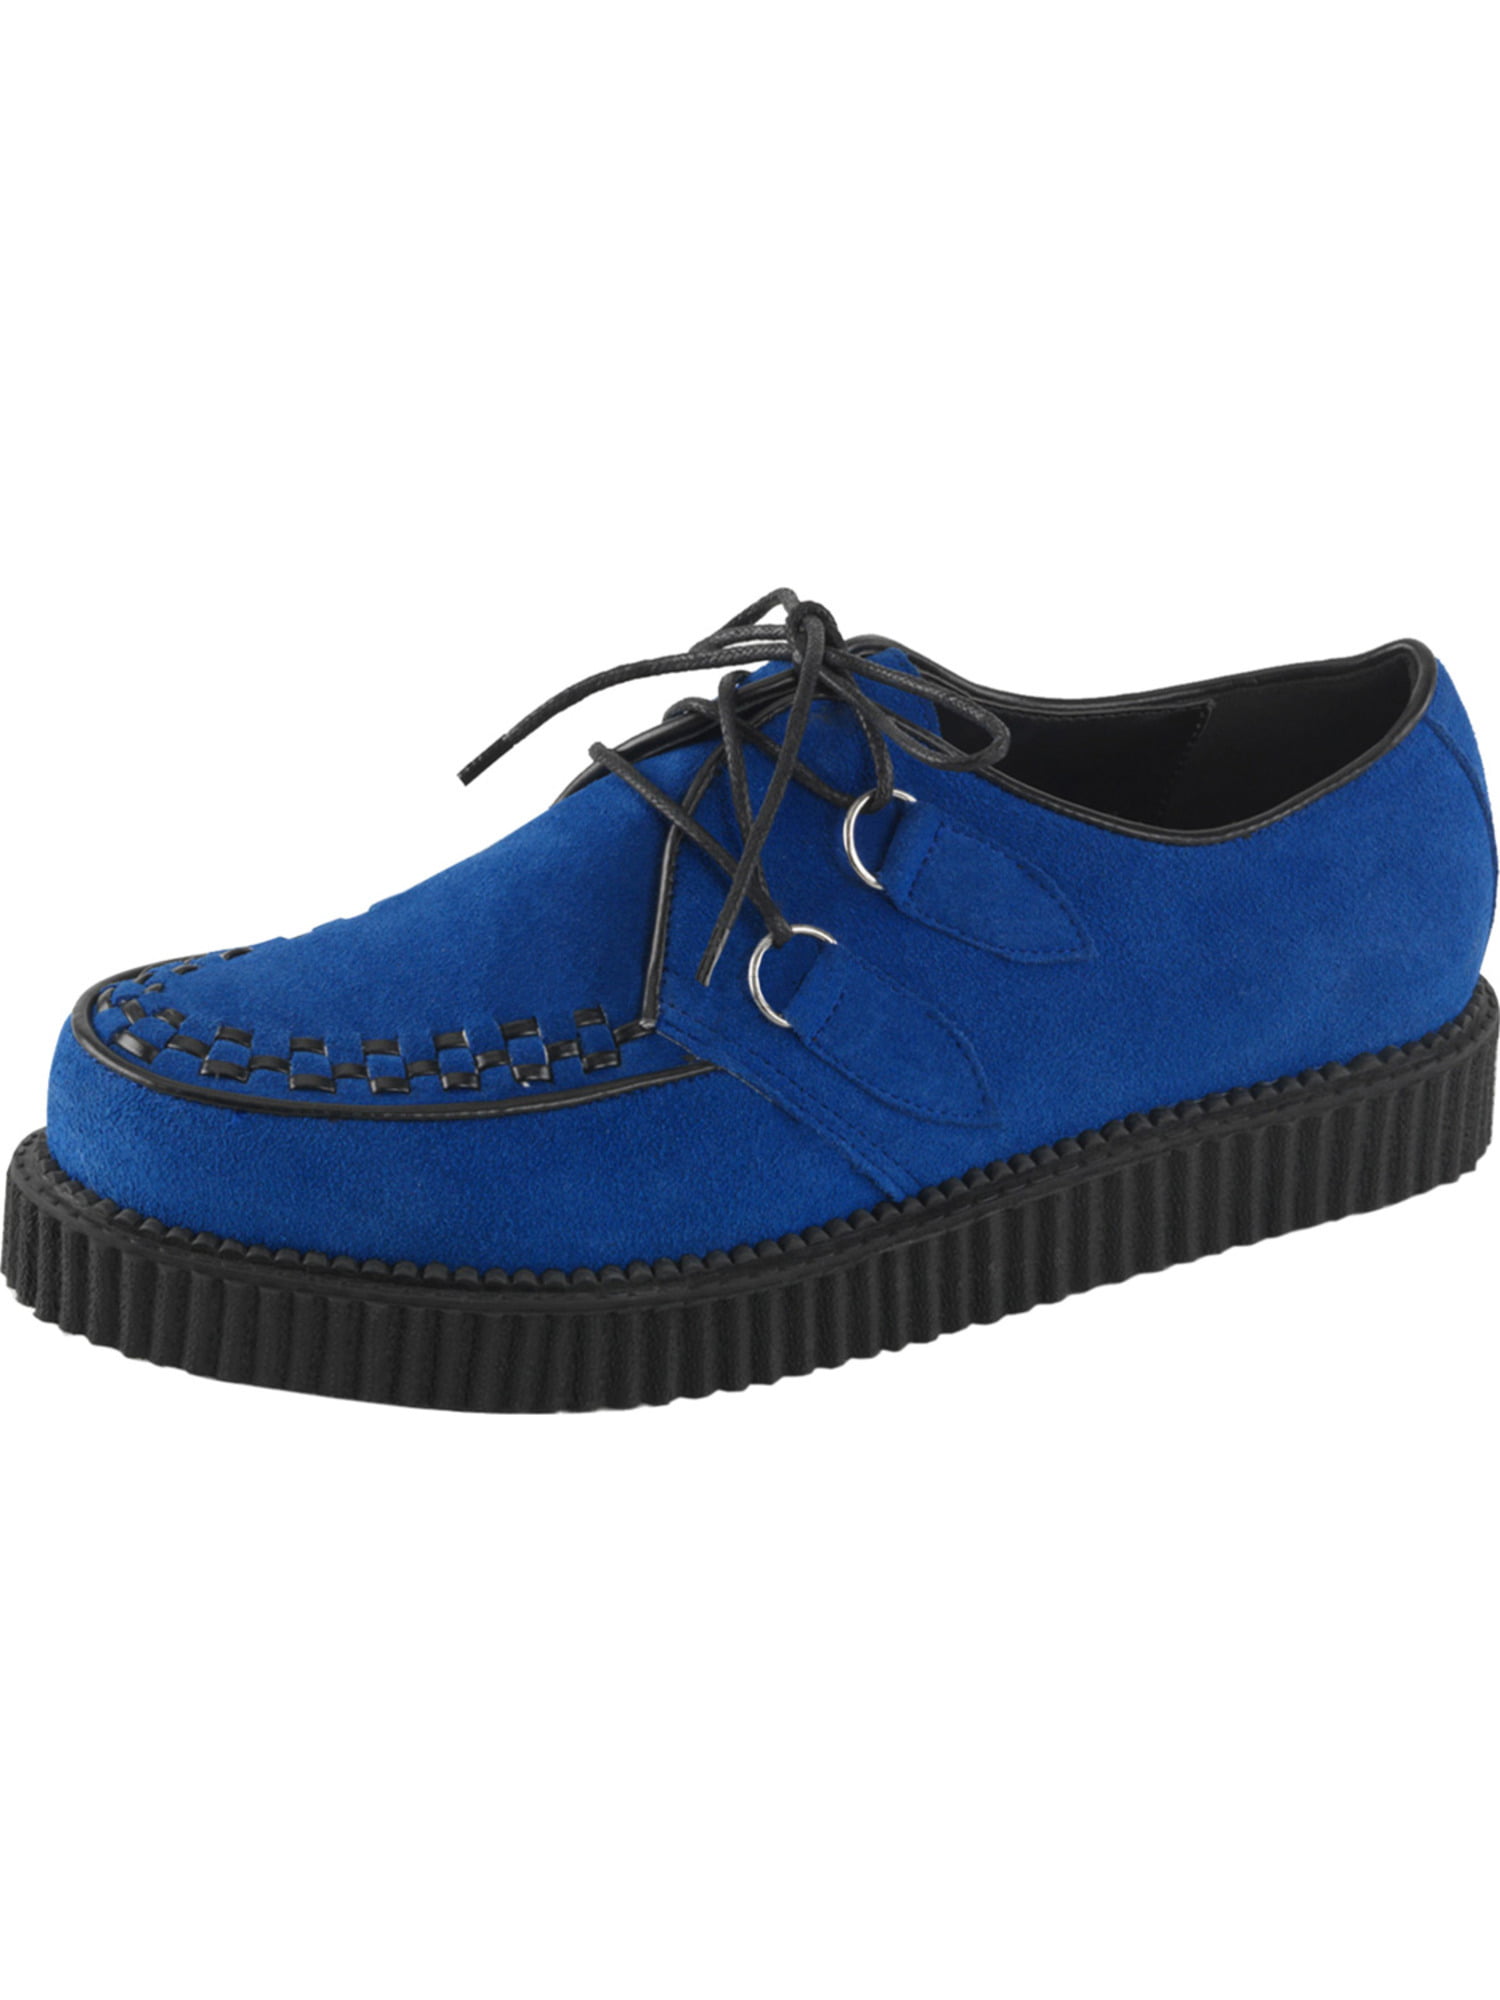 Demonia - Mens Blue Suede Shoes Platform Creepers D-Ring Lace Up ...